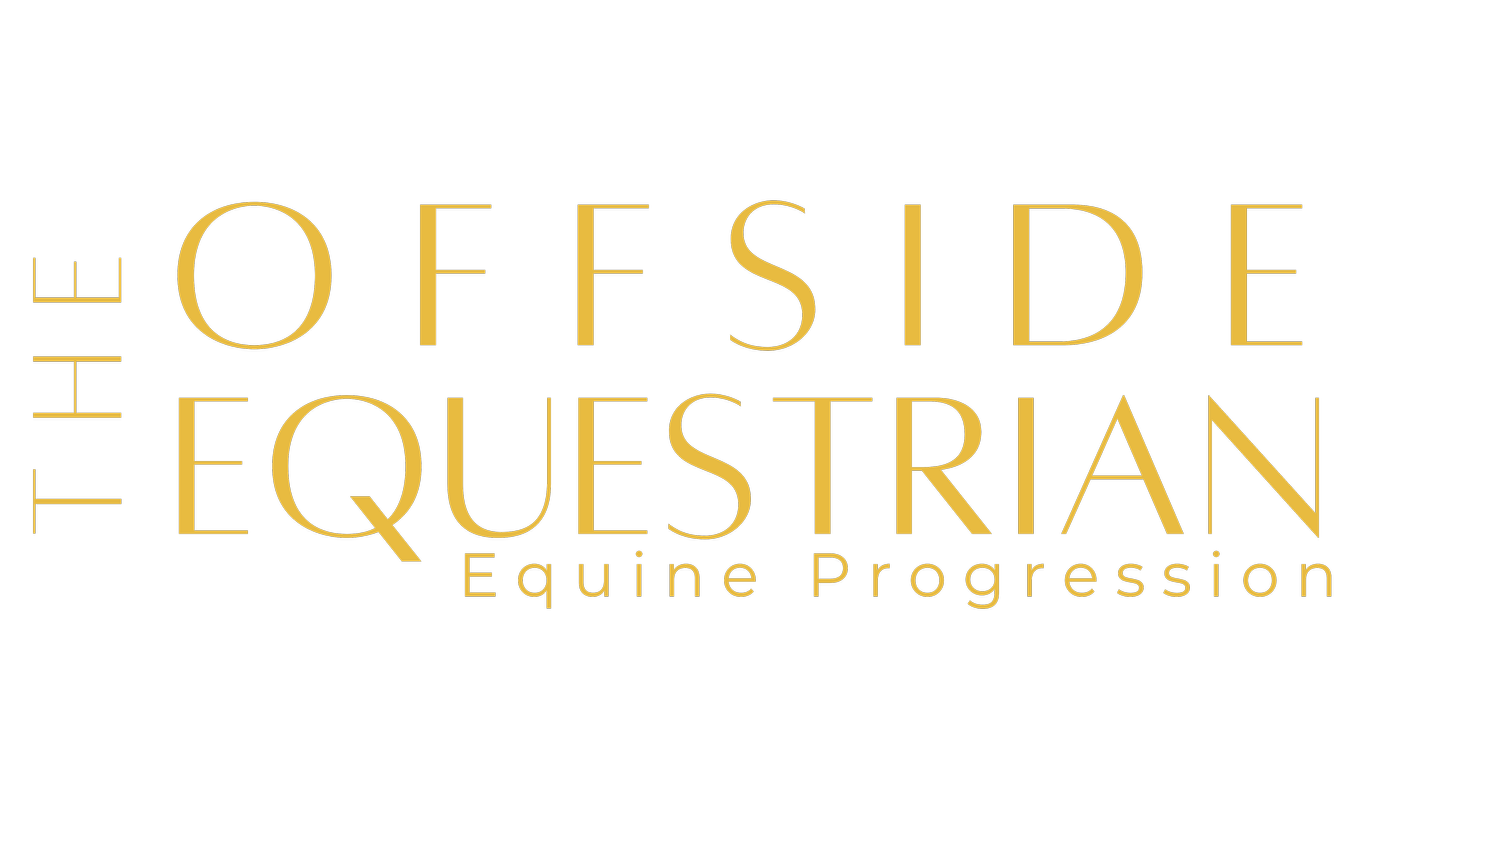 The Offside Equestrian